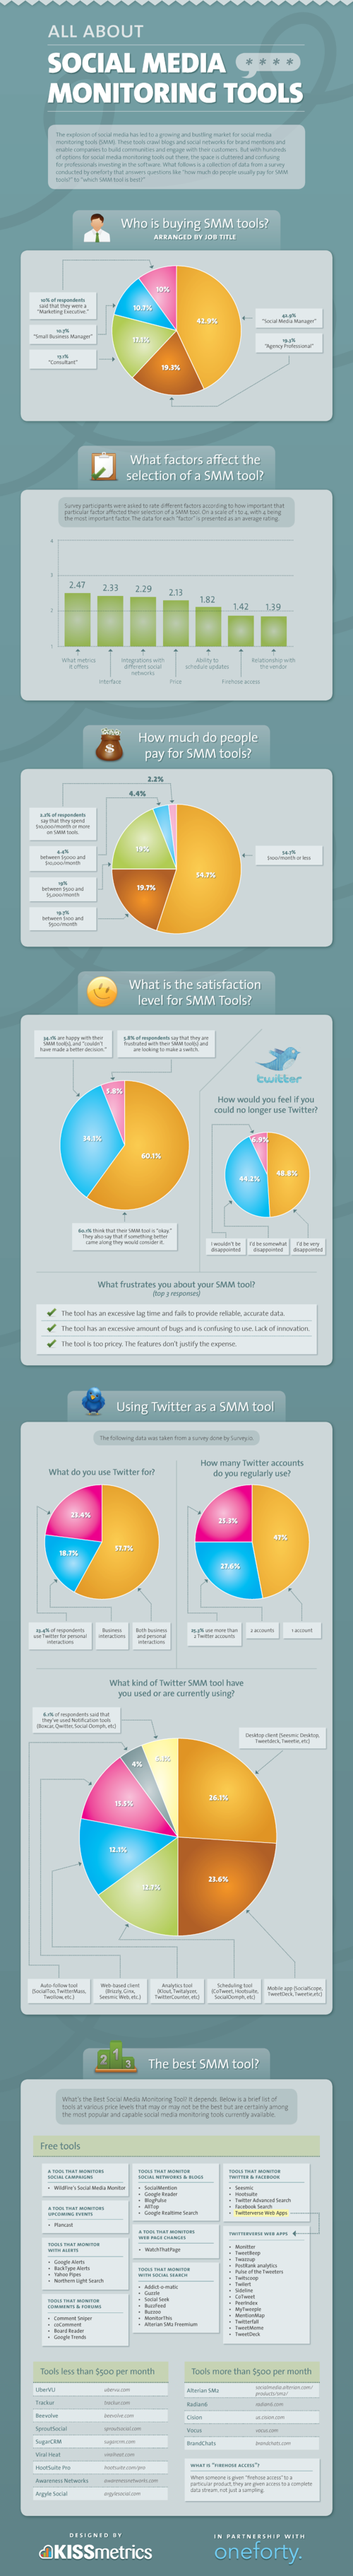 What Are The Best Social Media Monitoring Tools? [infographic]